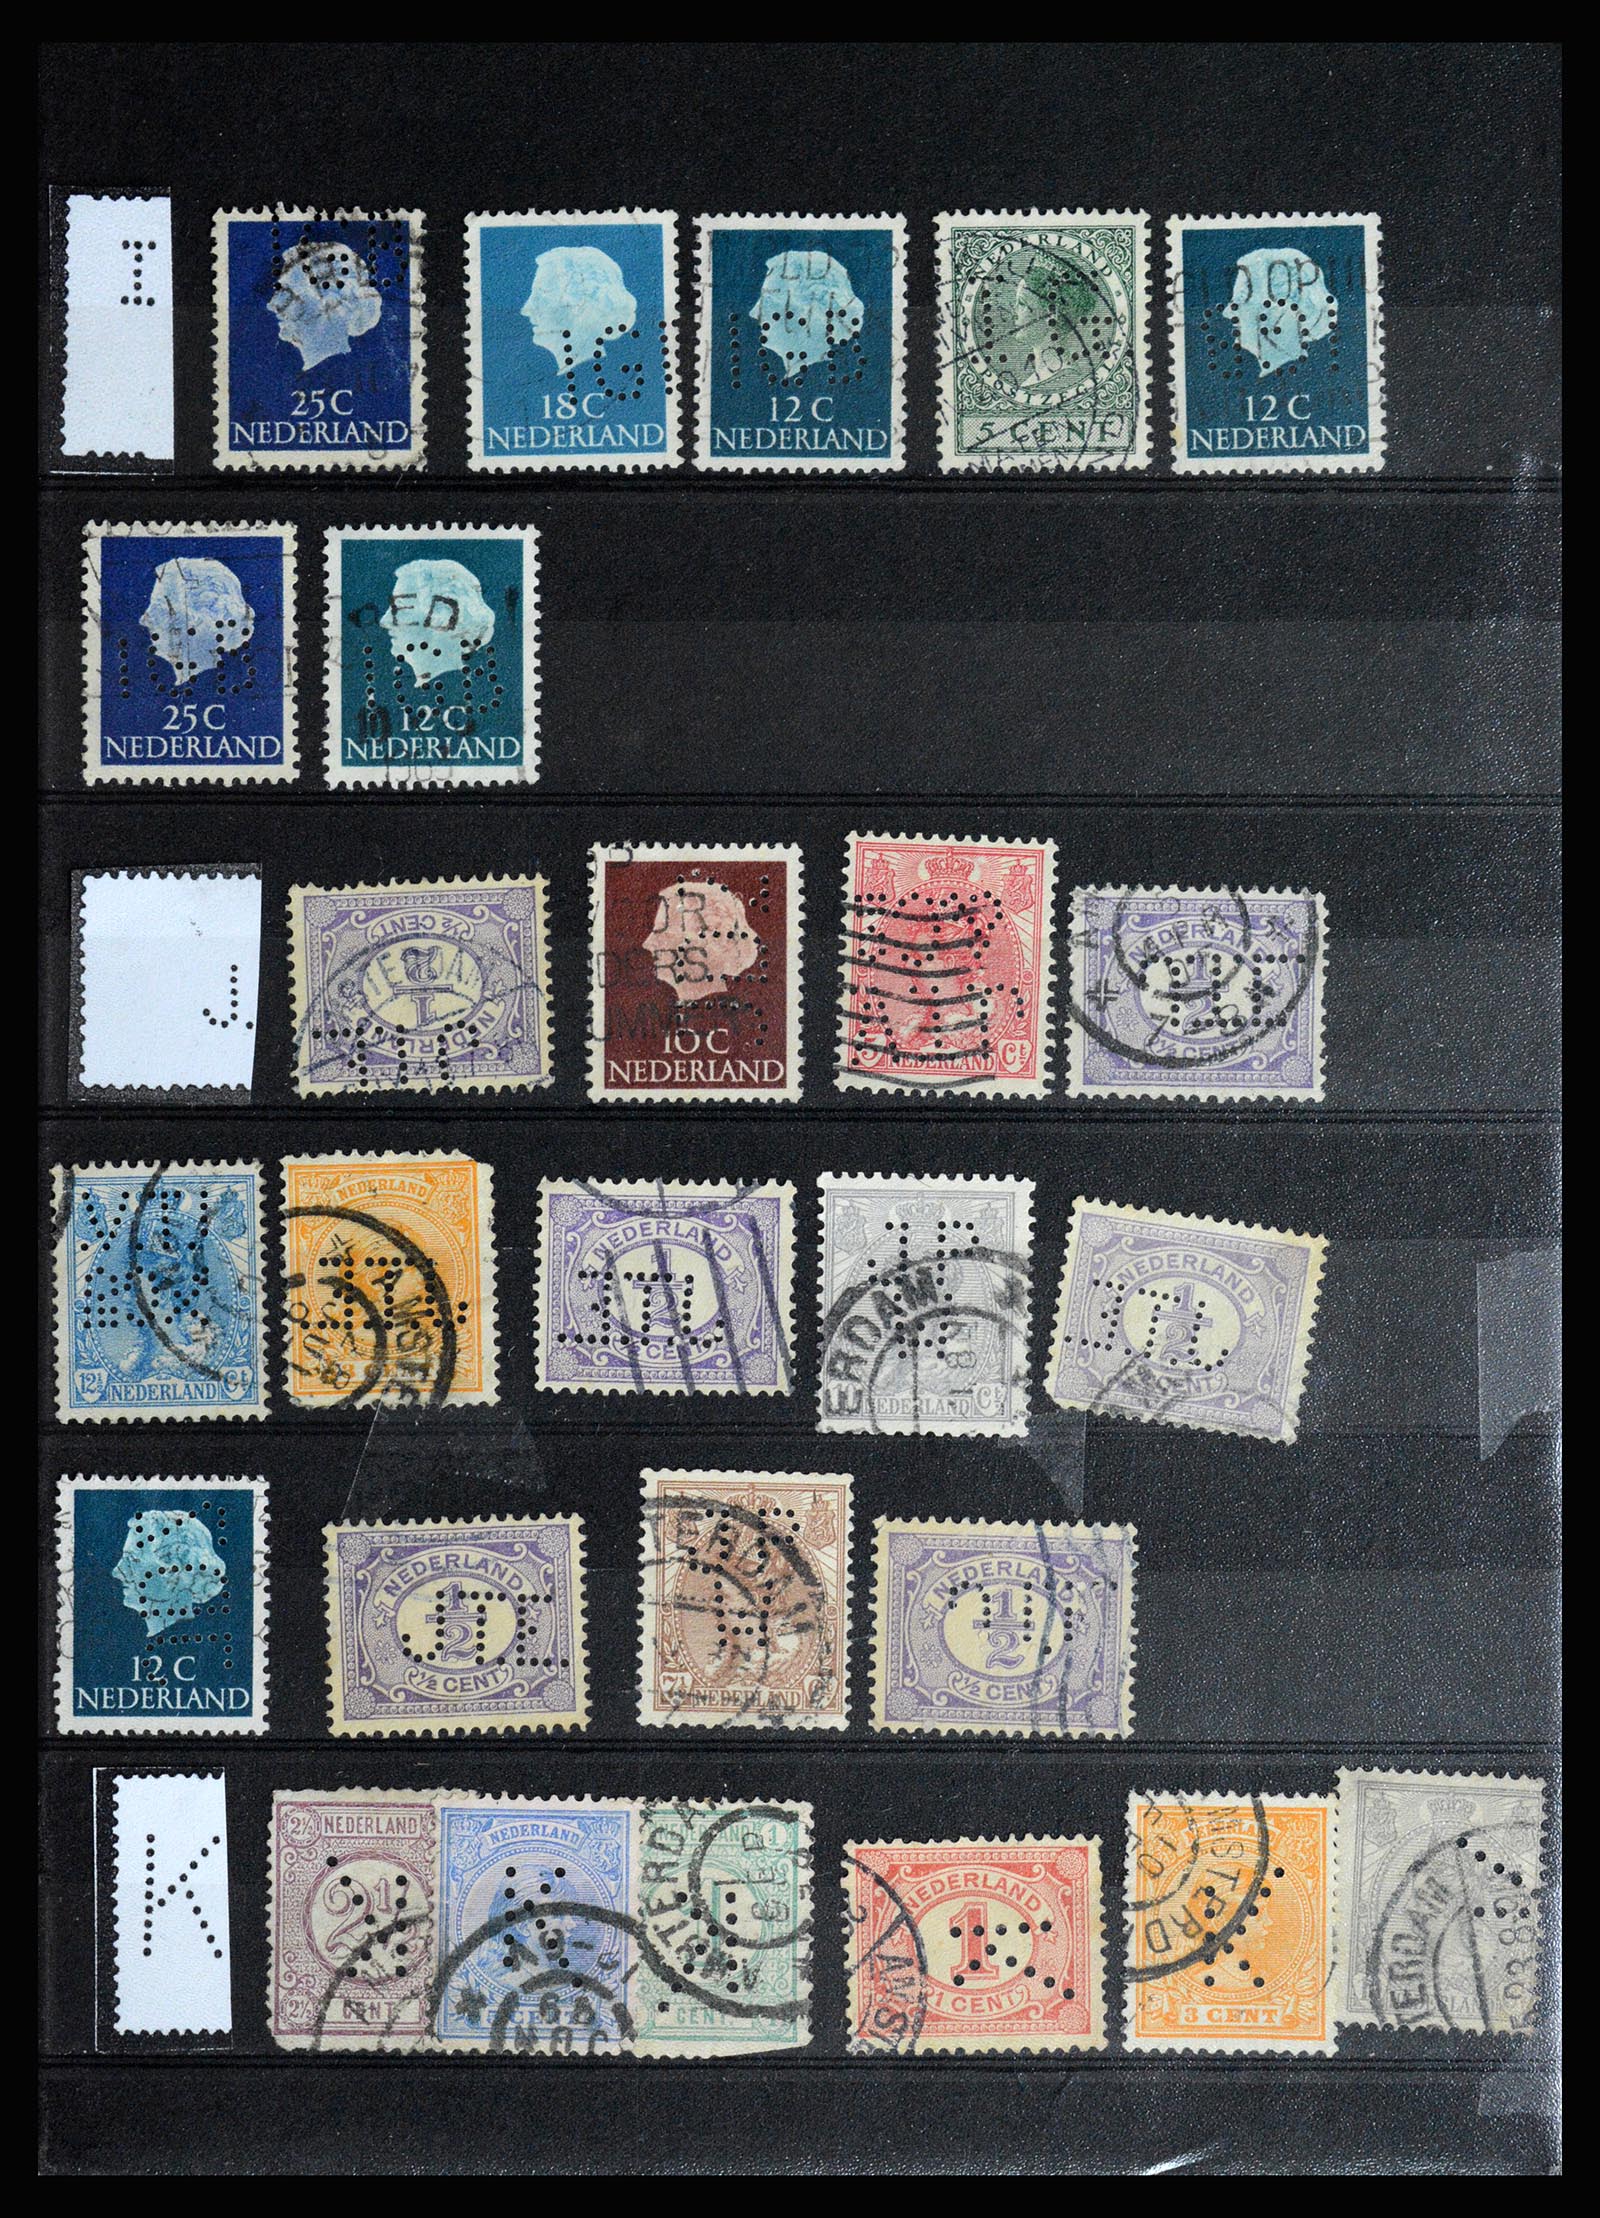 36849 008 - Stamp collection 36849 Netherlands perfins 1891-1960.